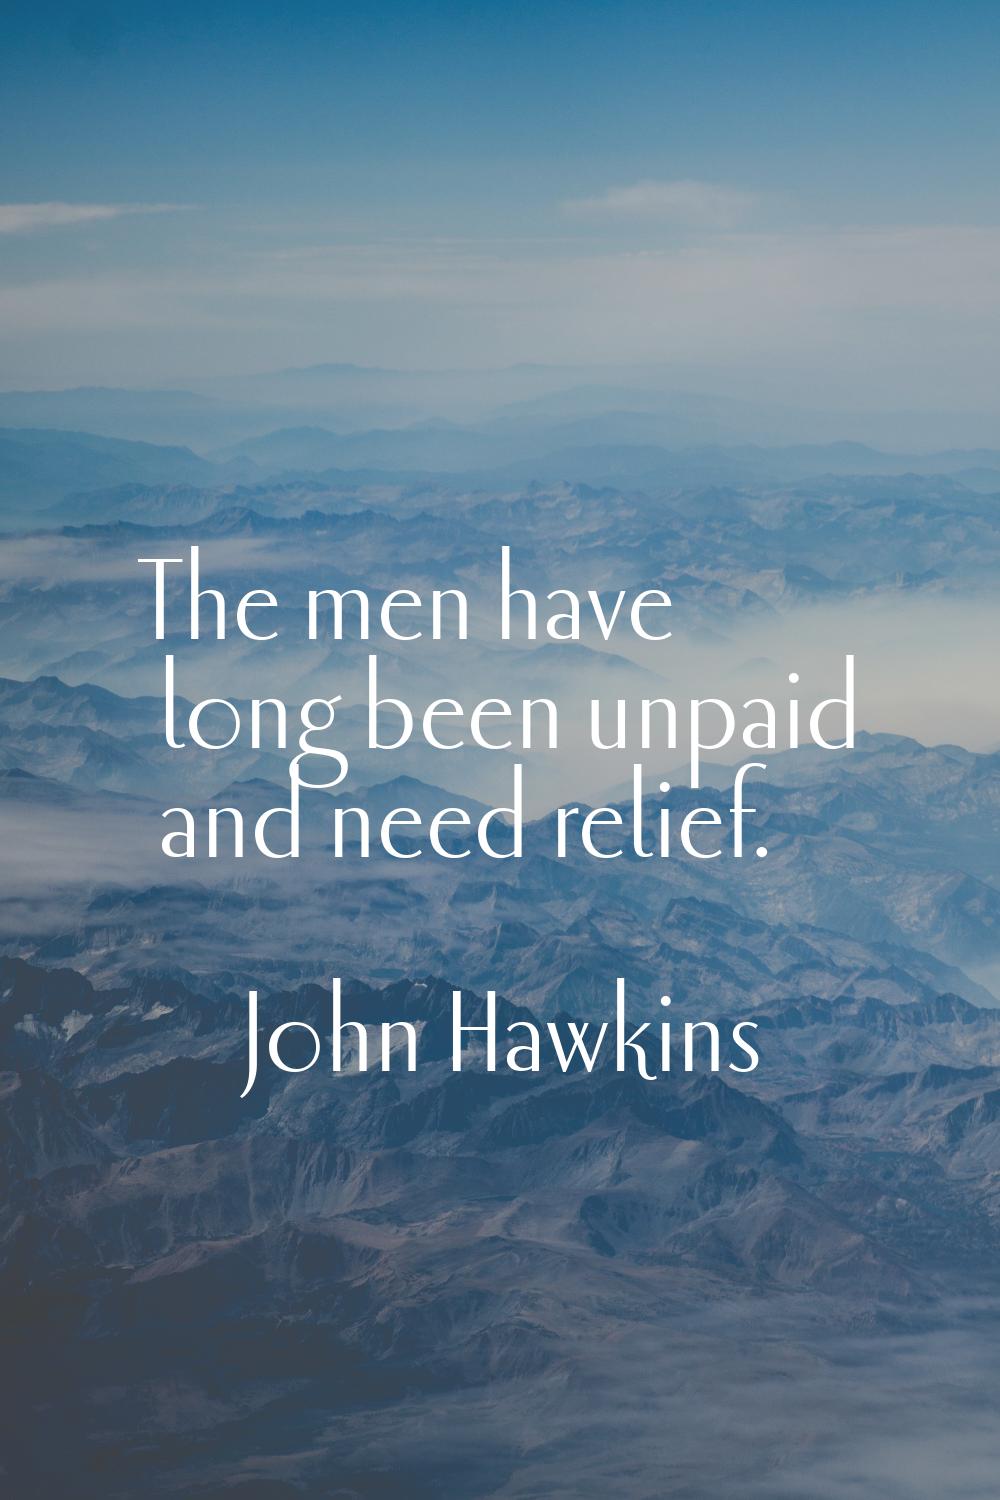 The men have long been unpaid and need relief.